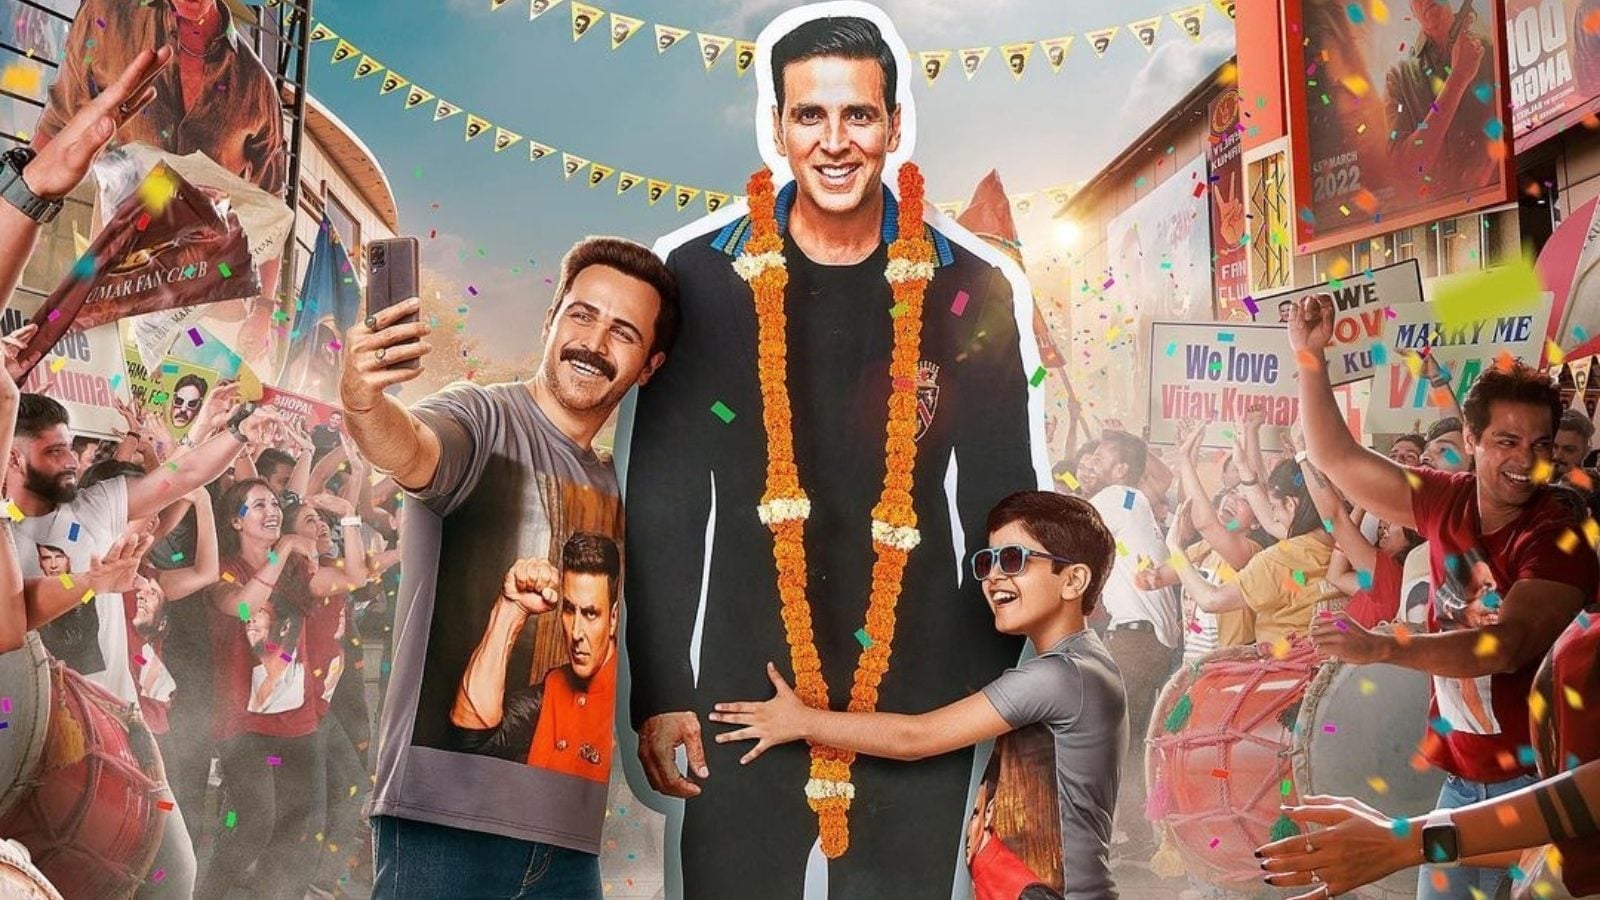 Akshay Kumar, Emraan Hashmi's Selfiee Trailer Will Release on Jan 22, to be  Attached to Pathaan in Theatres